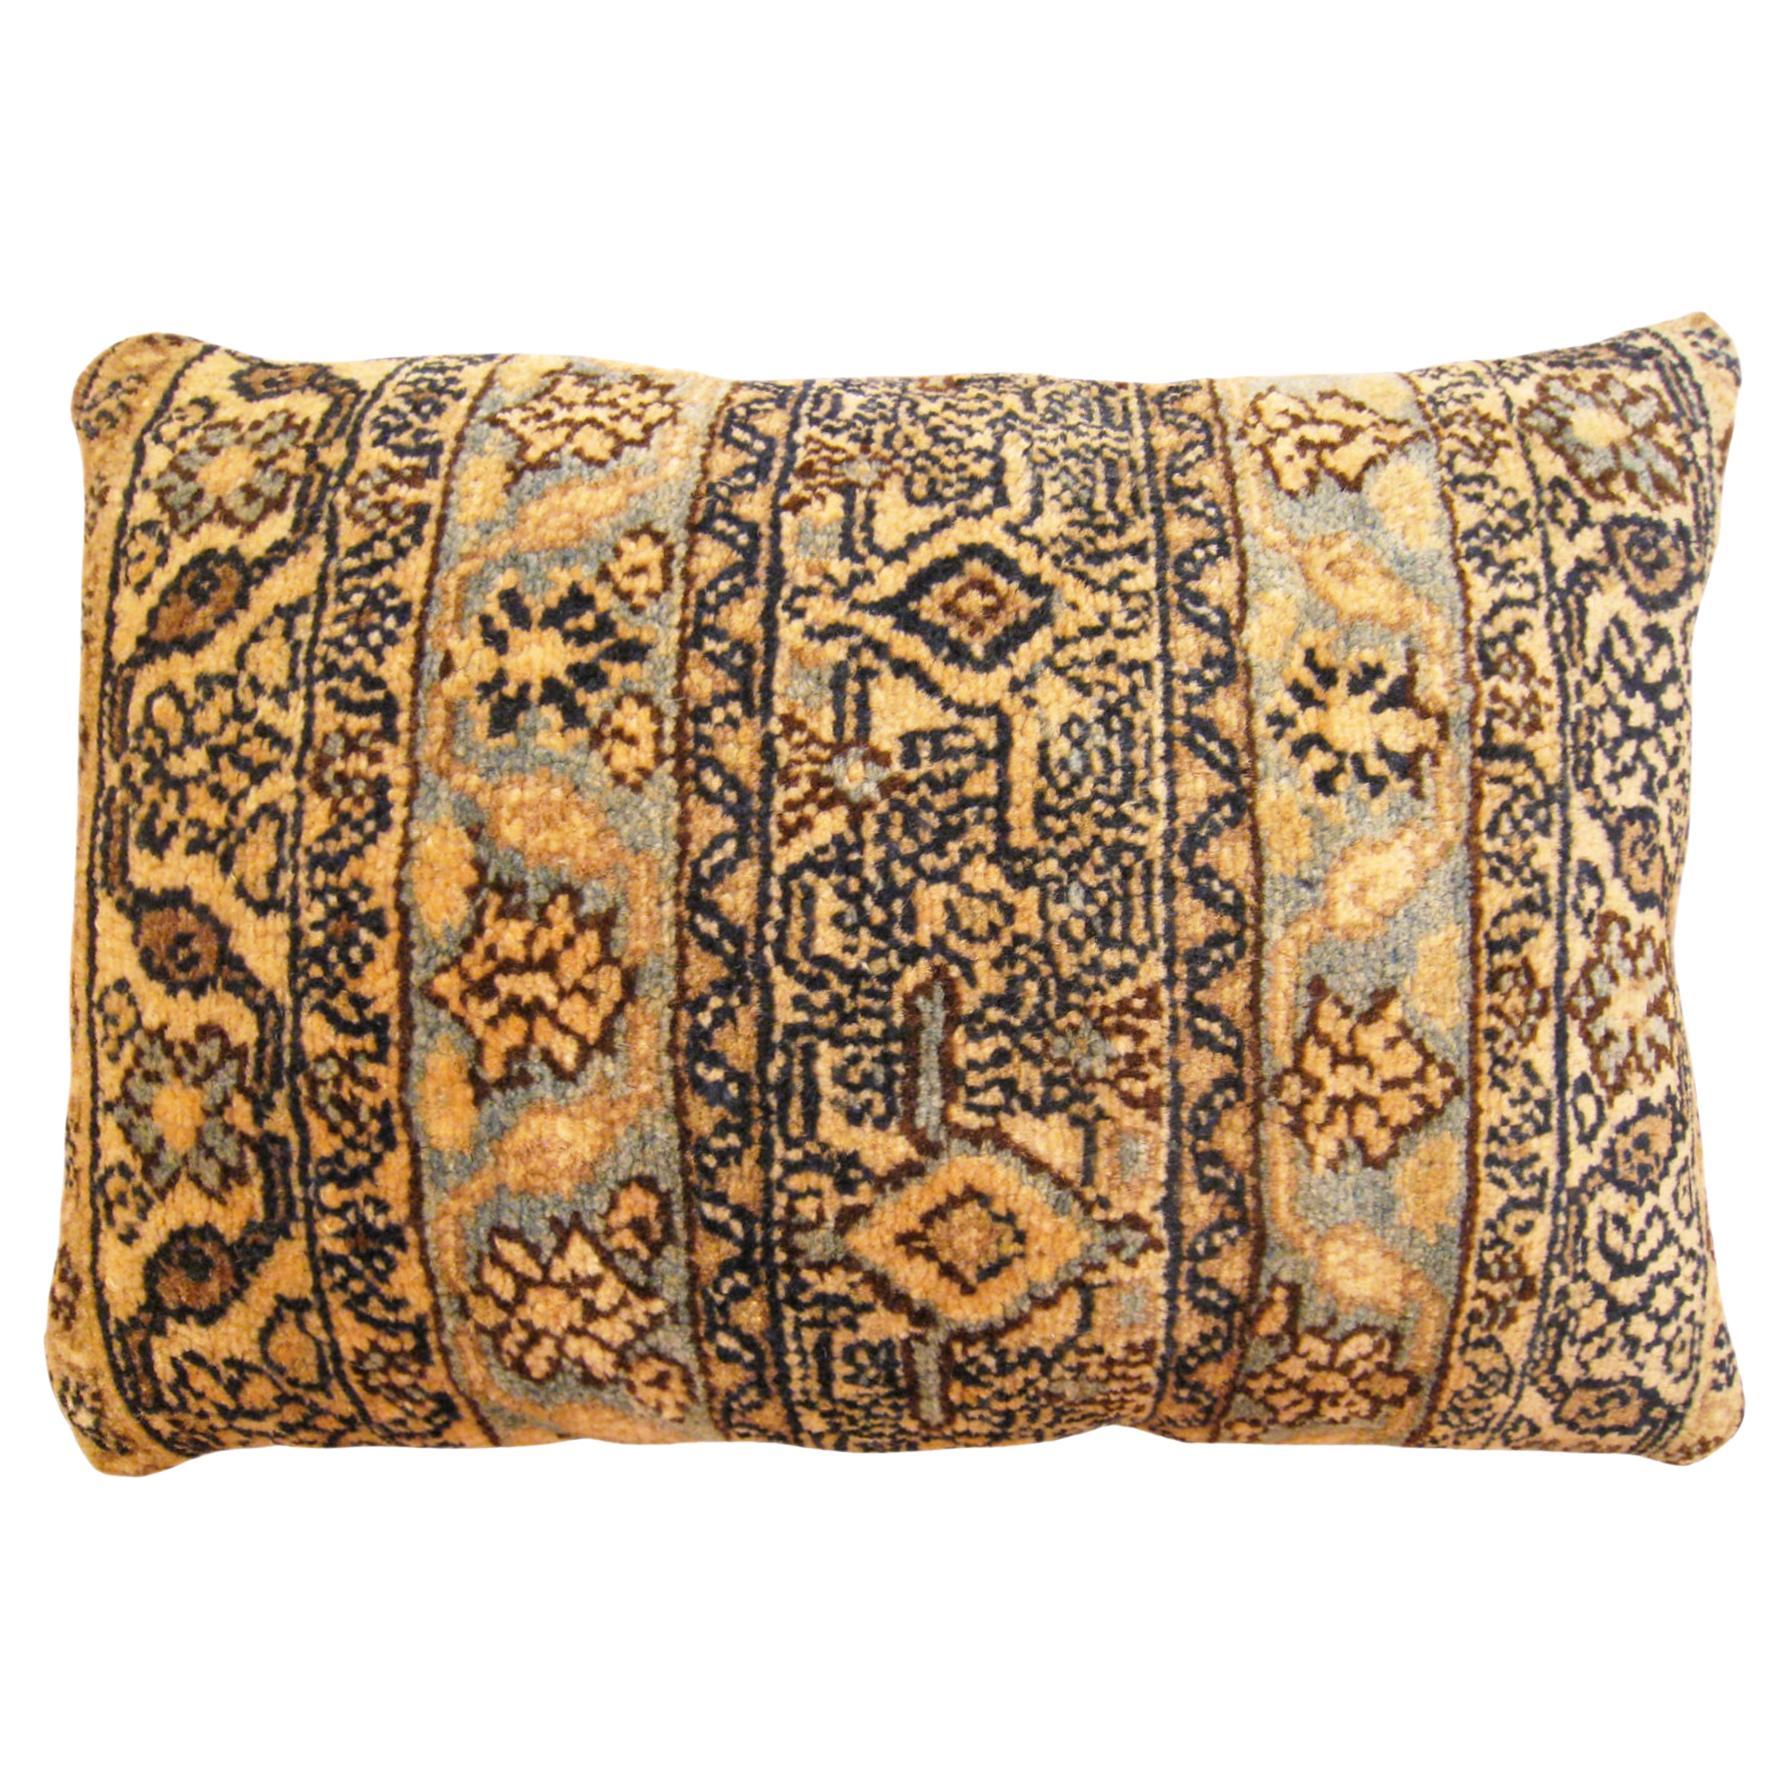 Decorative Antique Persian Hamadan Rug Pillow with Floral Elements Allover For Sale